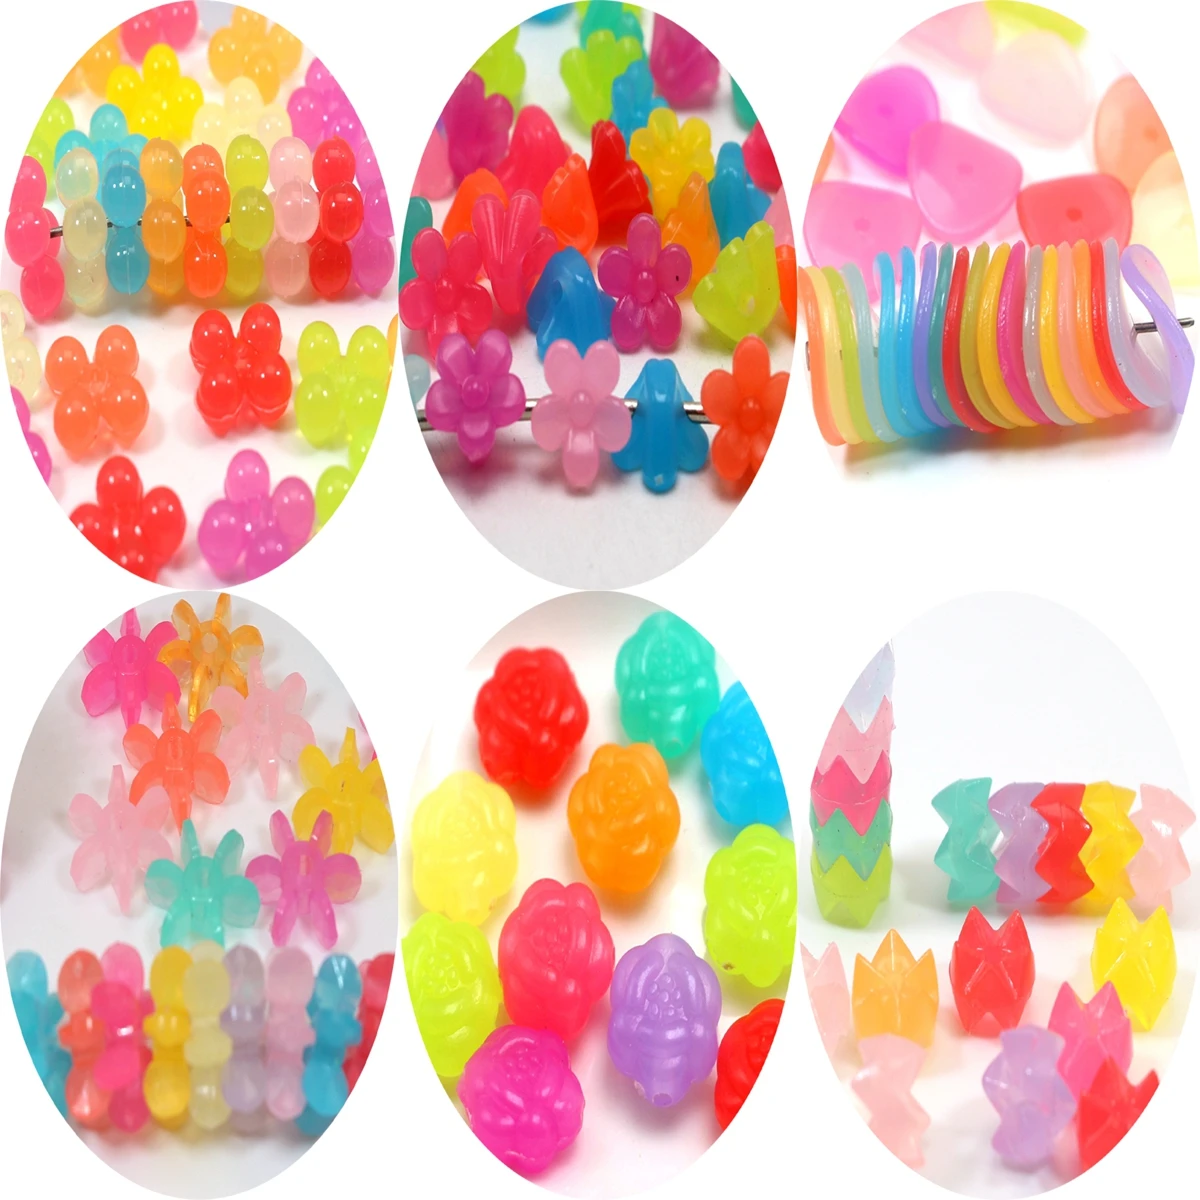 

200pcs Mixed Jelly Color Acrylic Various Shape Flower Spacer Beads Kids Crafts